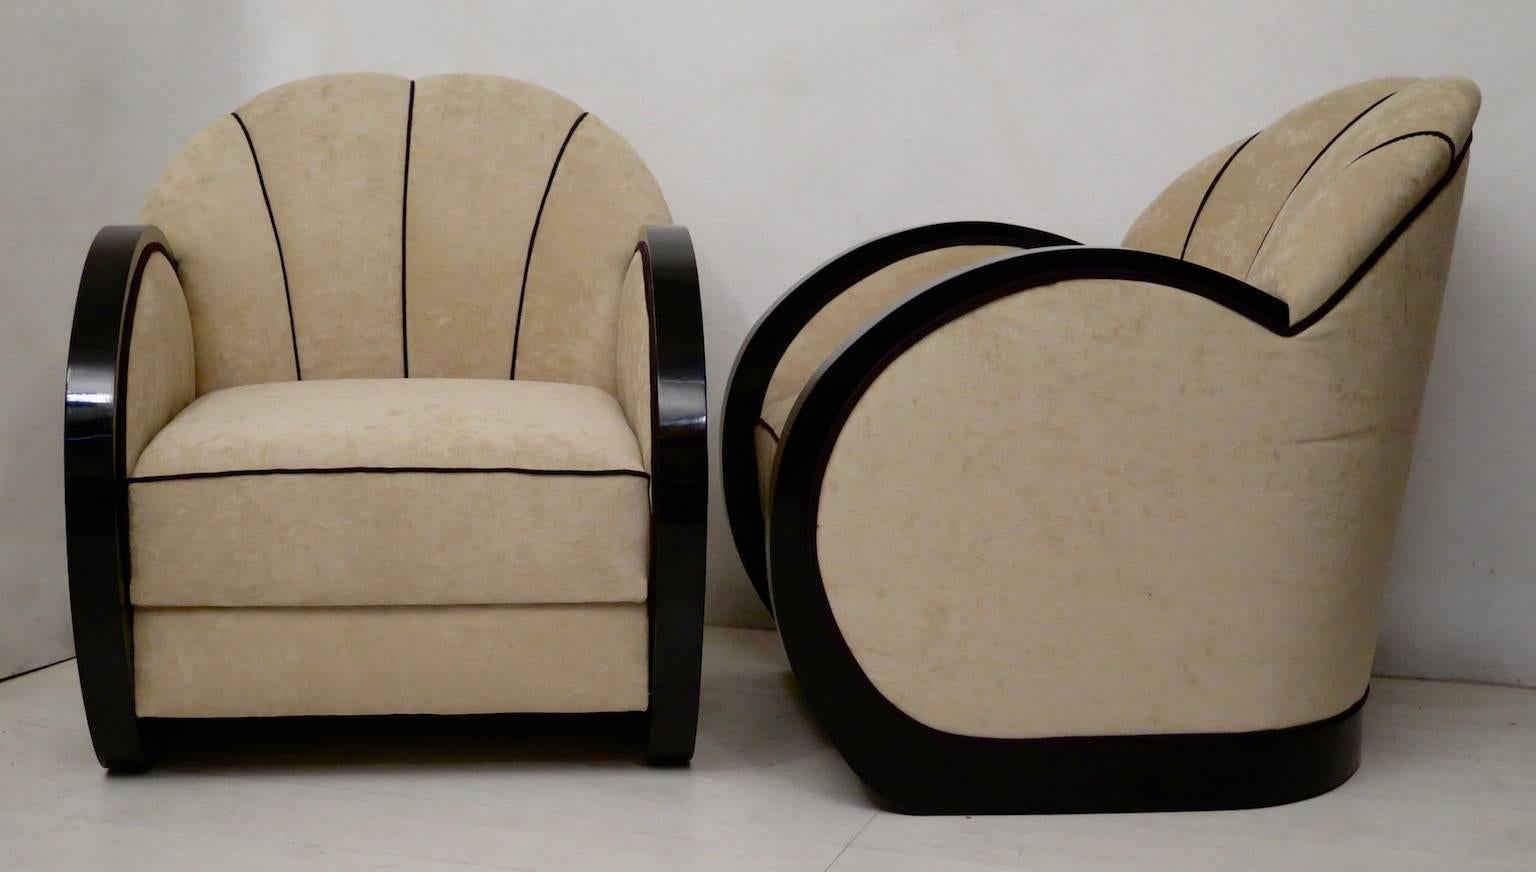 Pair of Italian armchairs of the 1930s, all dressed in light brown velvet.
With a black wood strip which descends from the armrest side towards the foot.